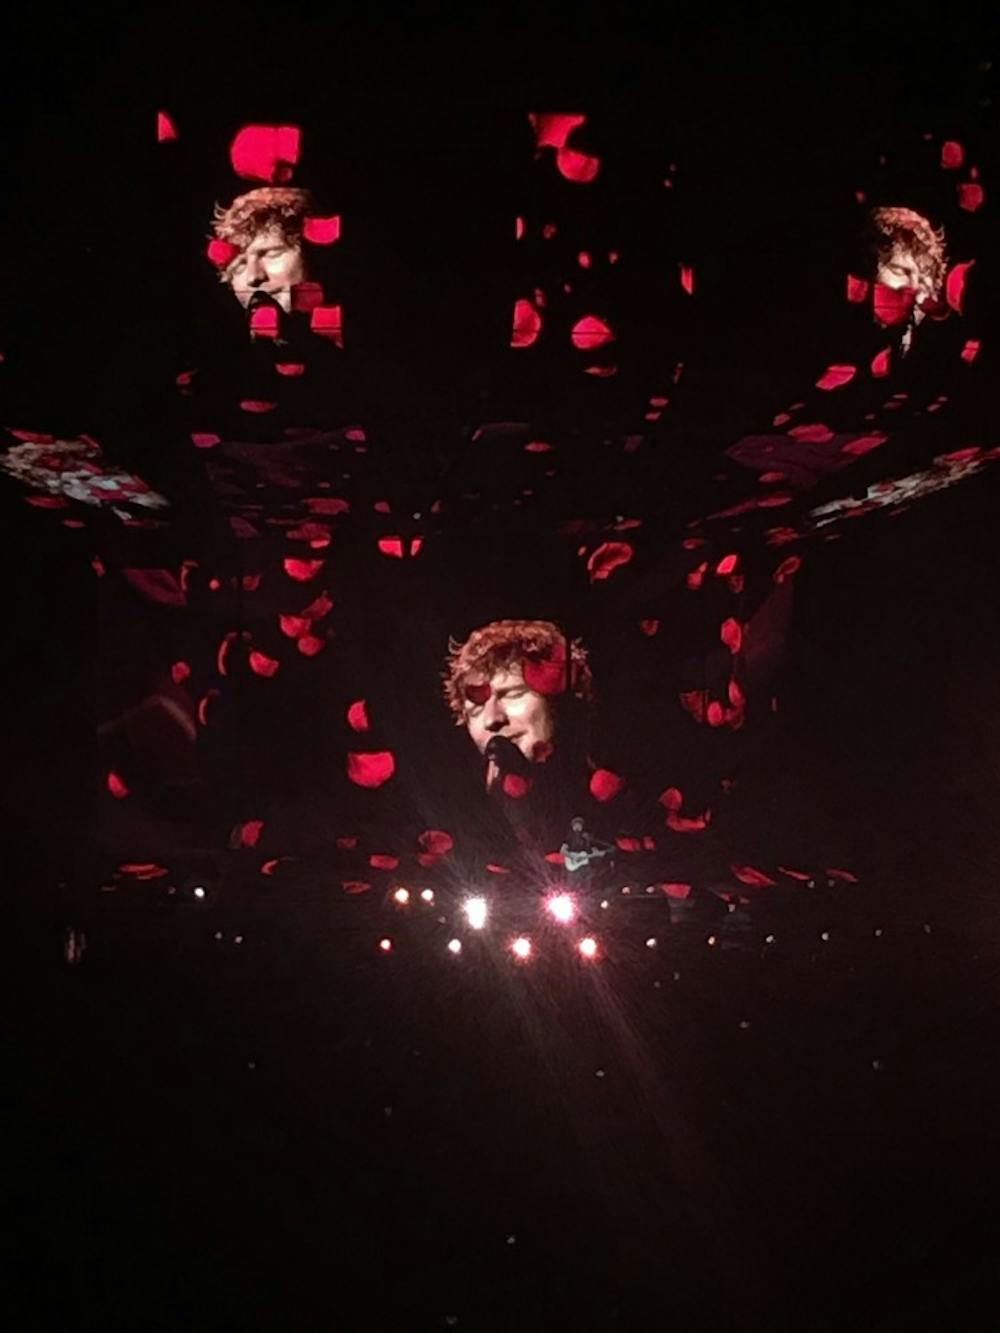 Ed Sheeran hit the stage for a second sold-out concert in DC